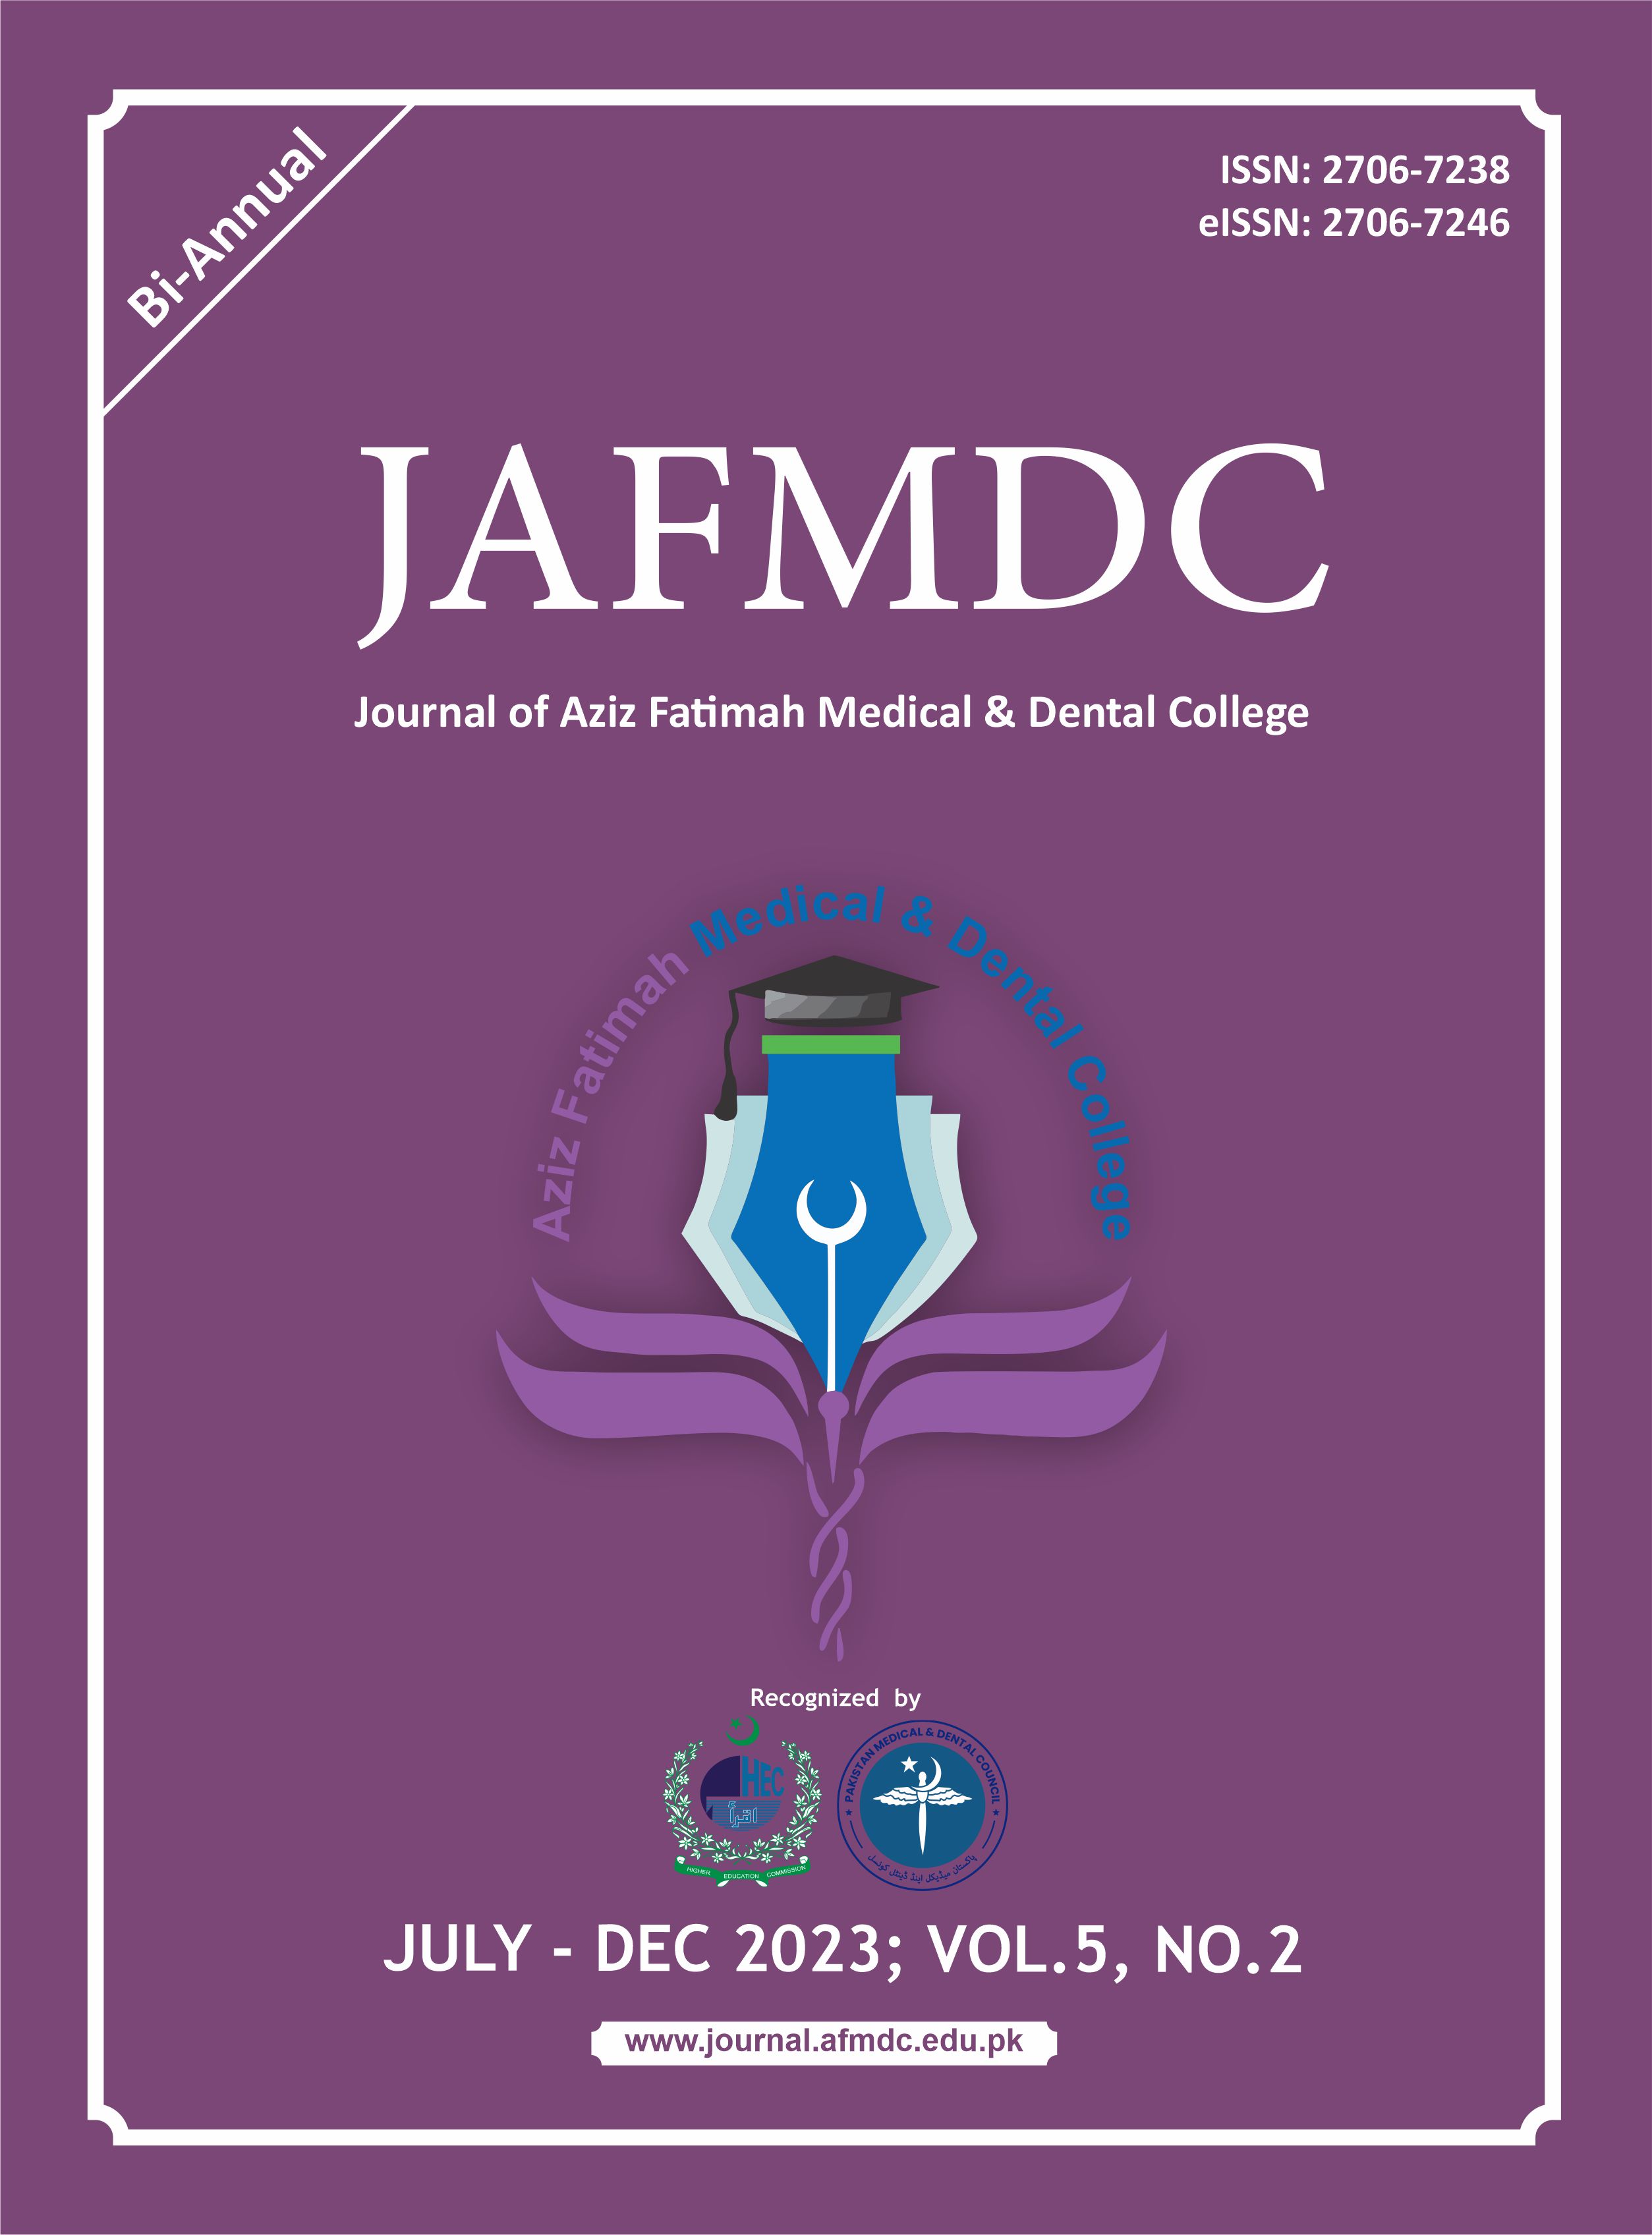 					View Vol. 5 No. 2 (2023): Journal of Aziz Fatimah Medical and Dental College:  July to December 2023
				